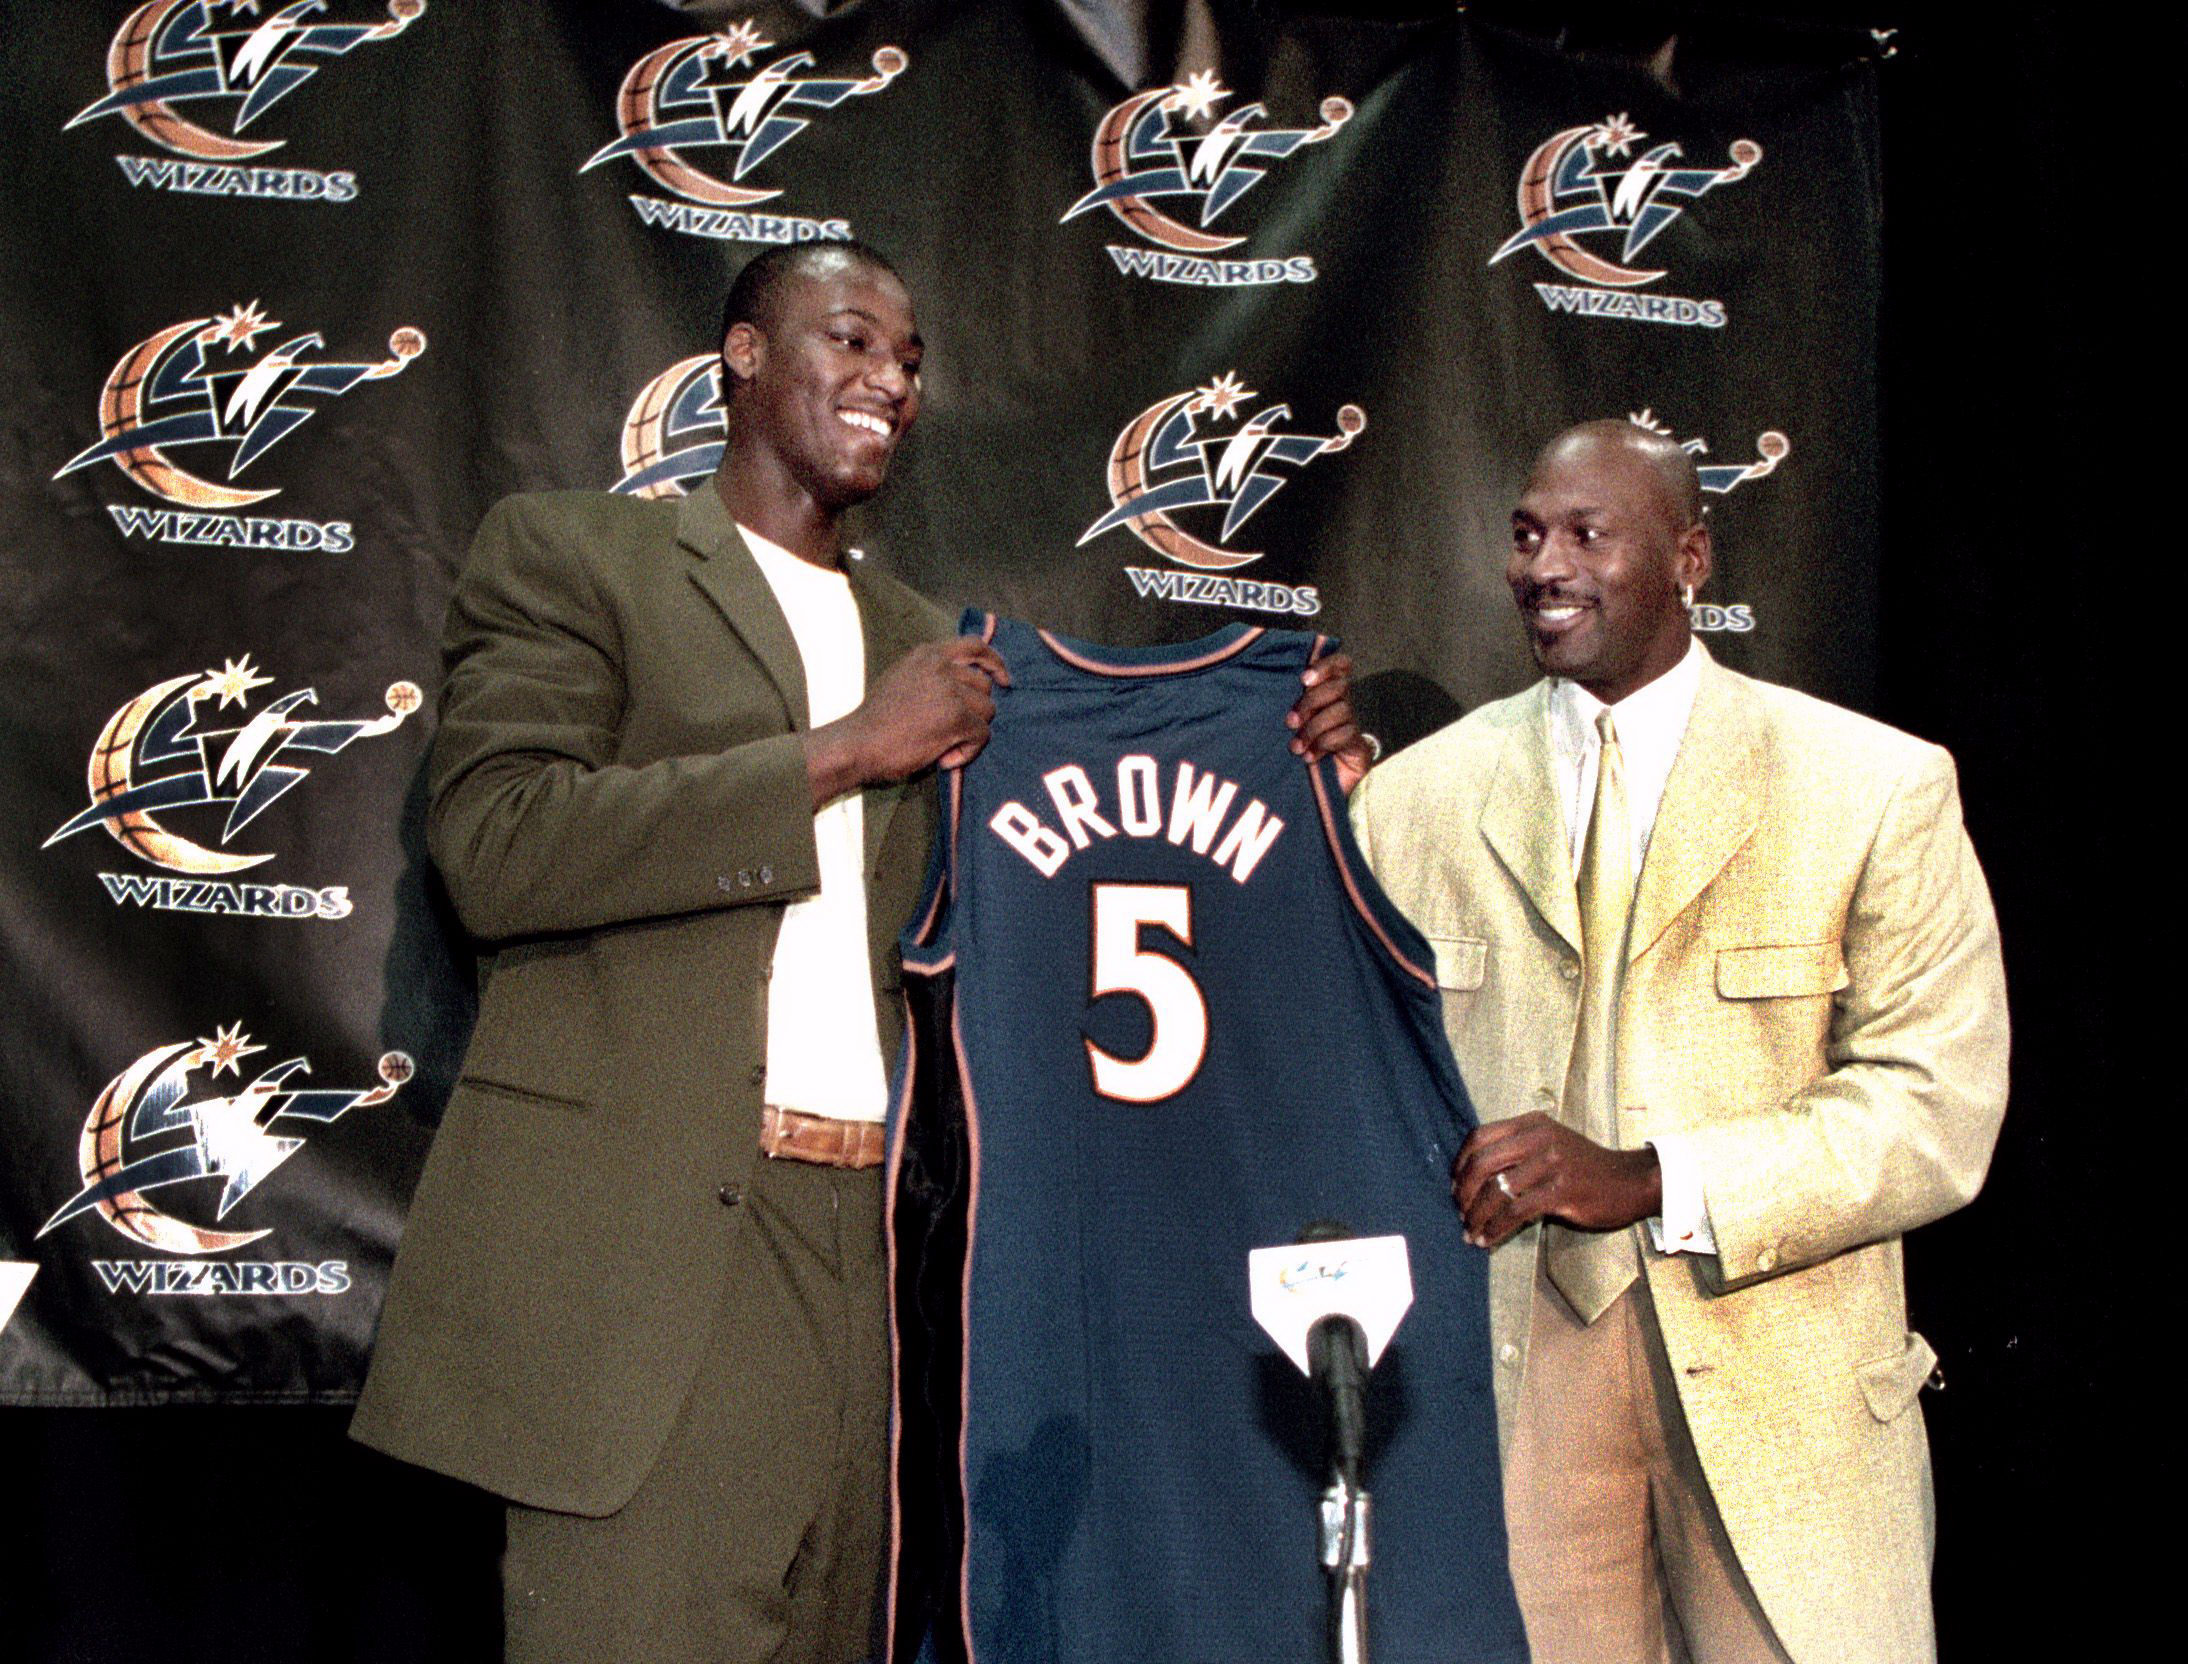 Washington Wizards: 15 greatest draft steals in franchise history